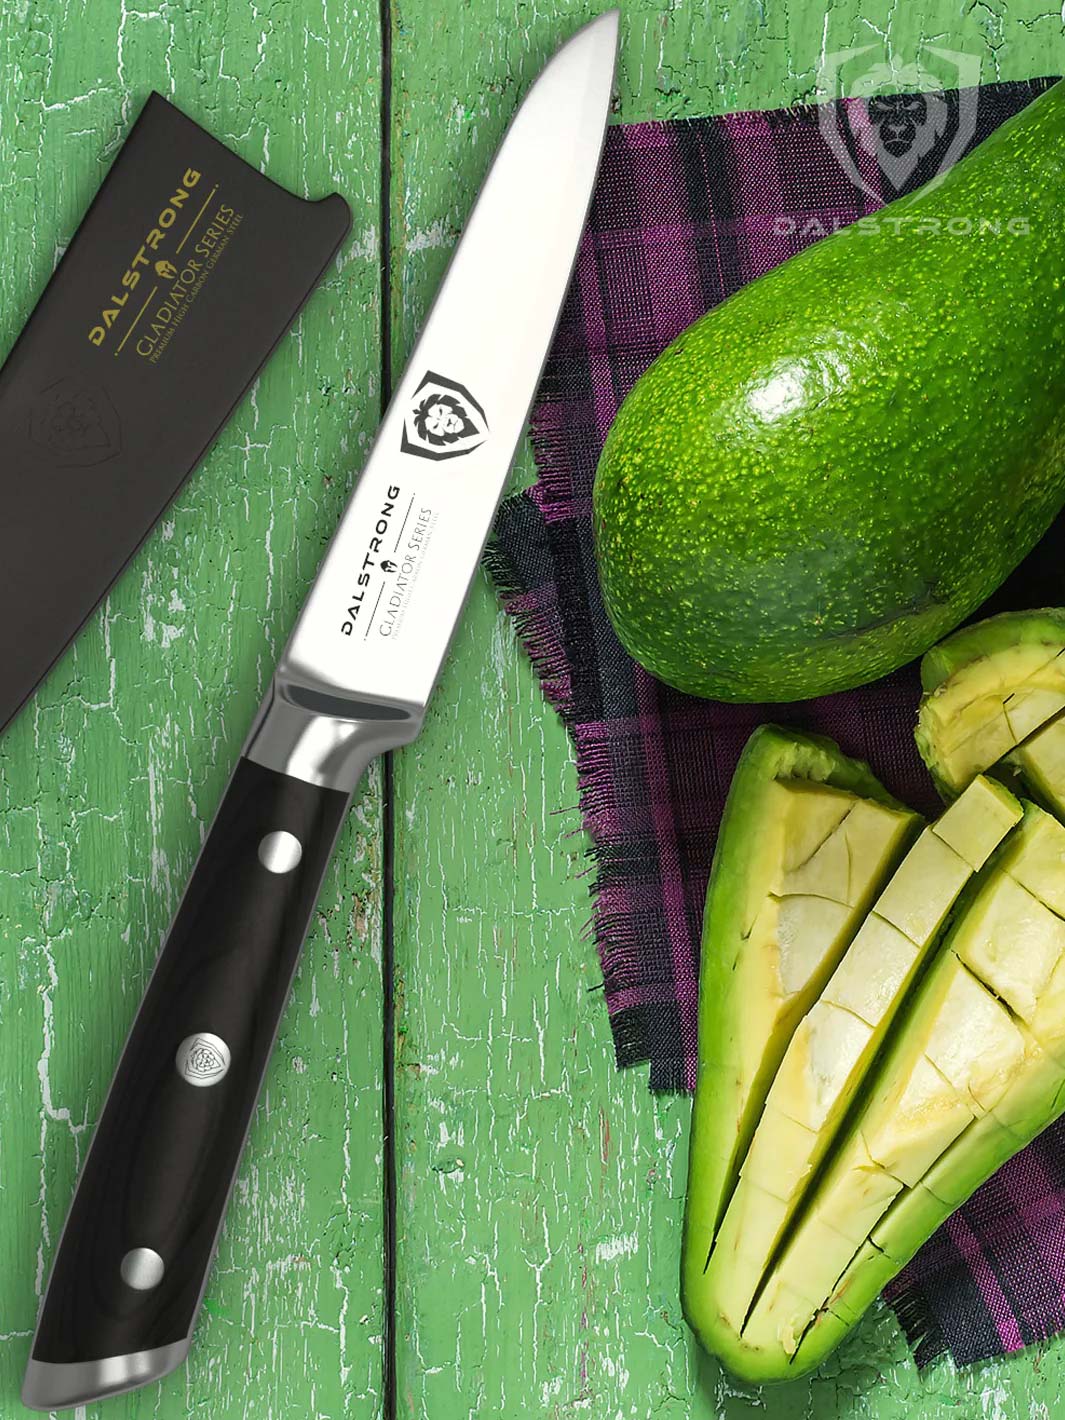 Dalstrong gladiator series 3.5 inch paring knife with black handle and an avocado sliced in half at the side.